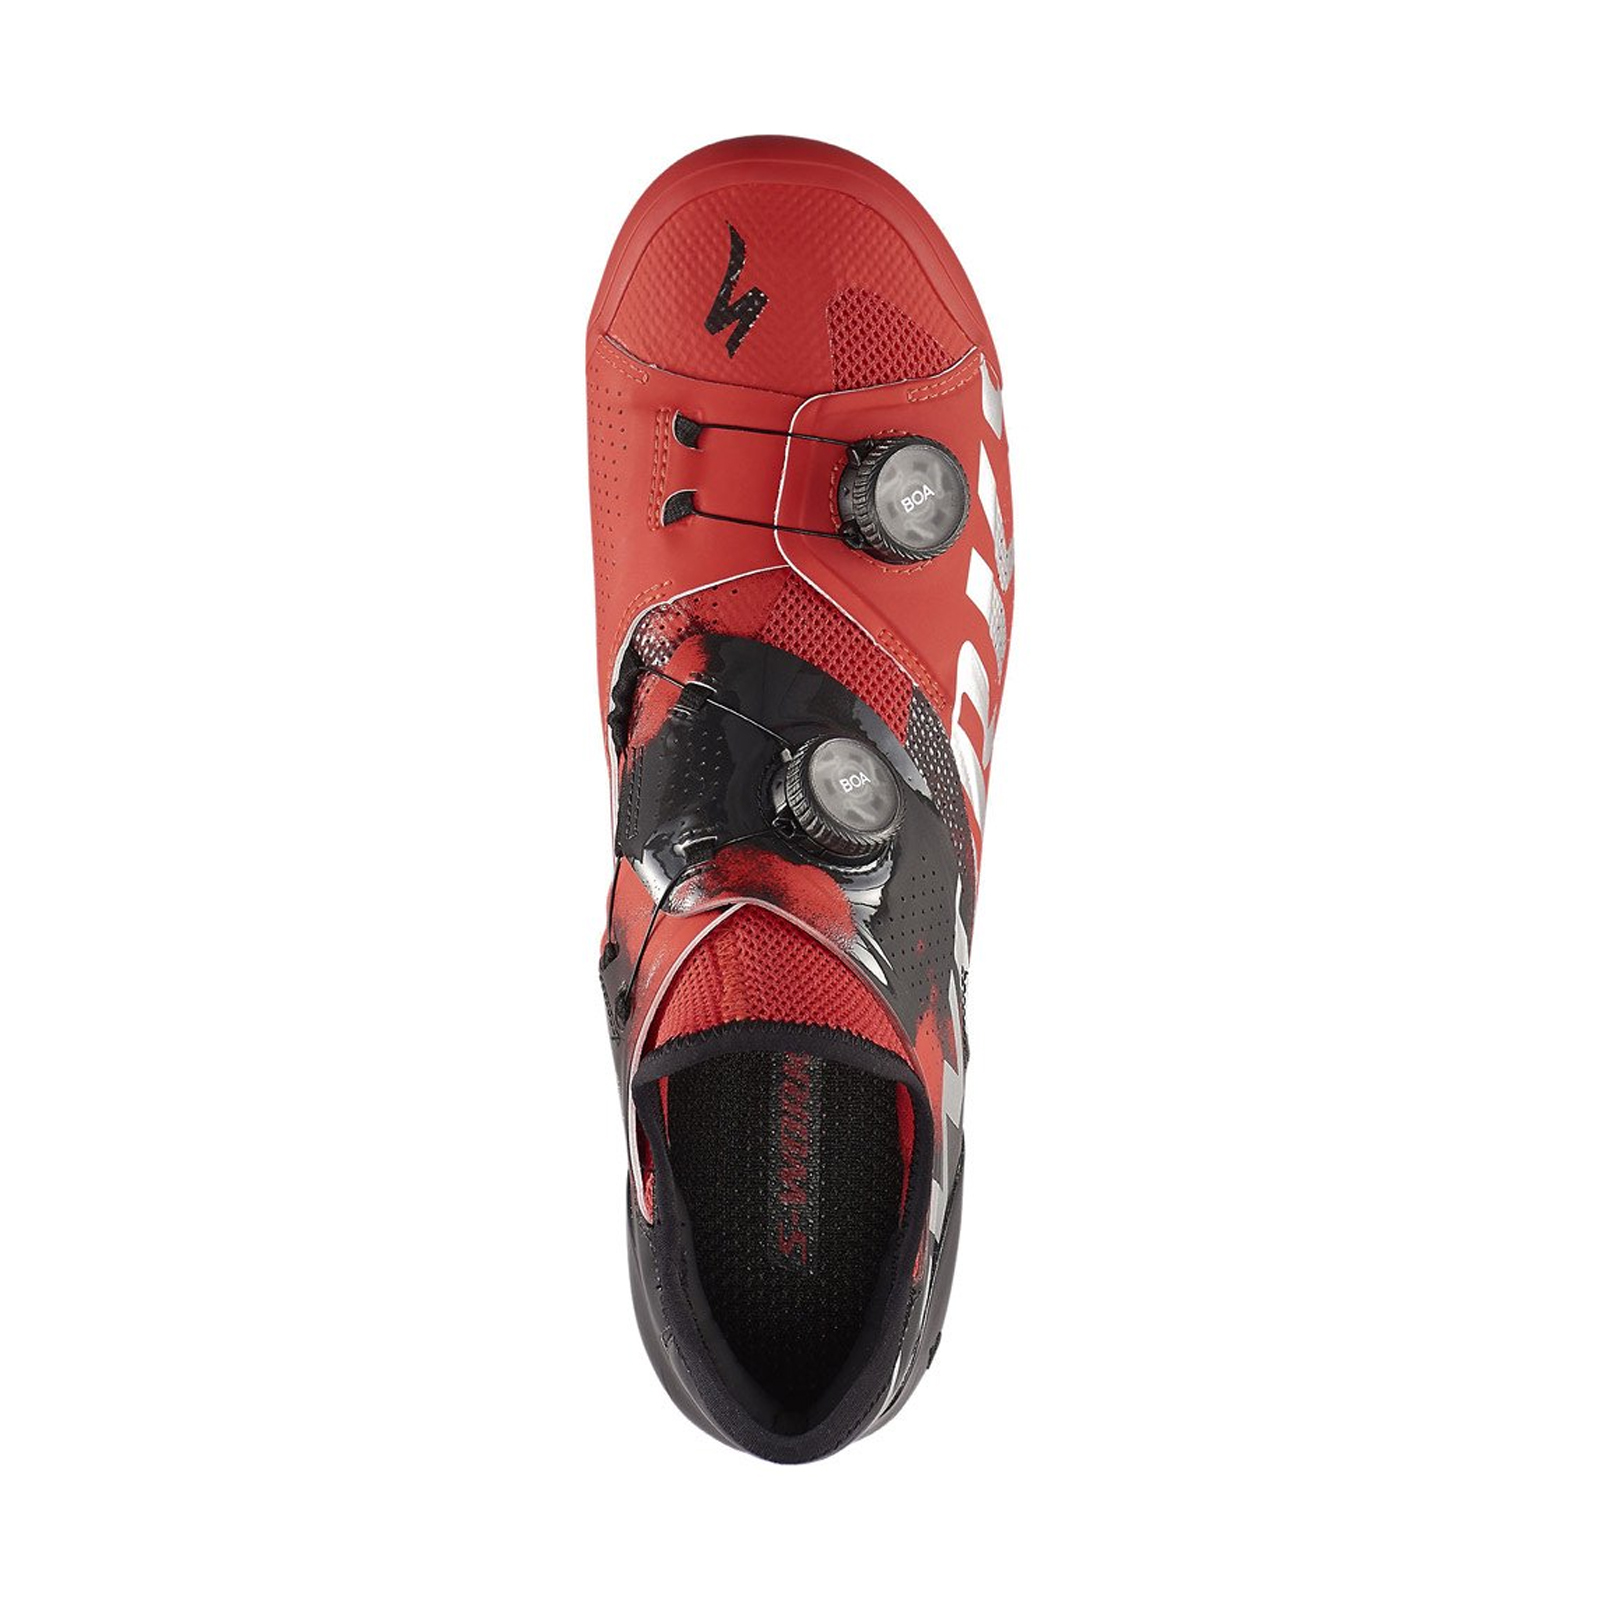 SW SPZ SW ARES RD ZAPATO RED